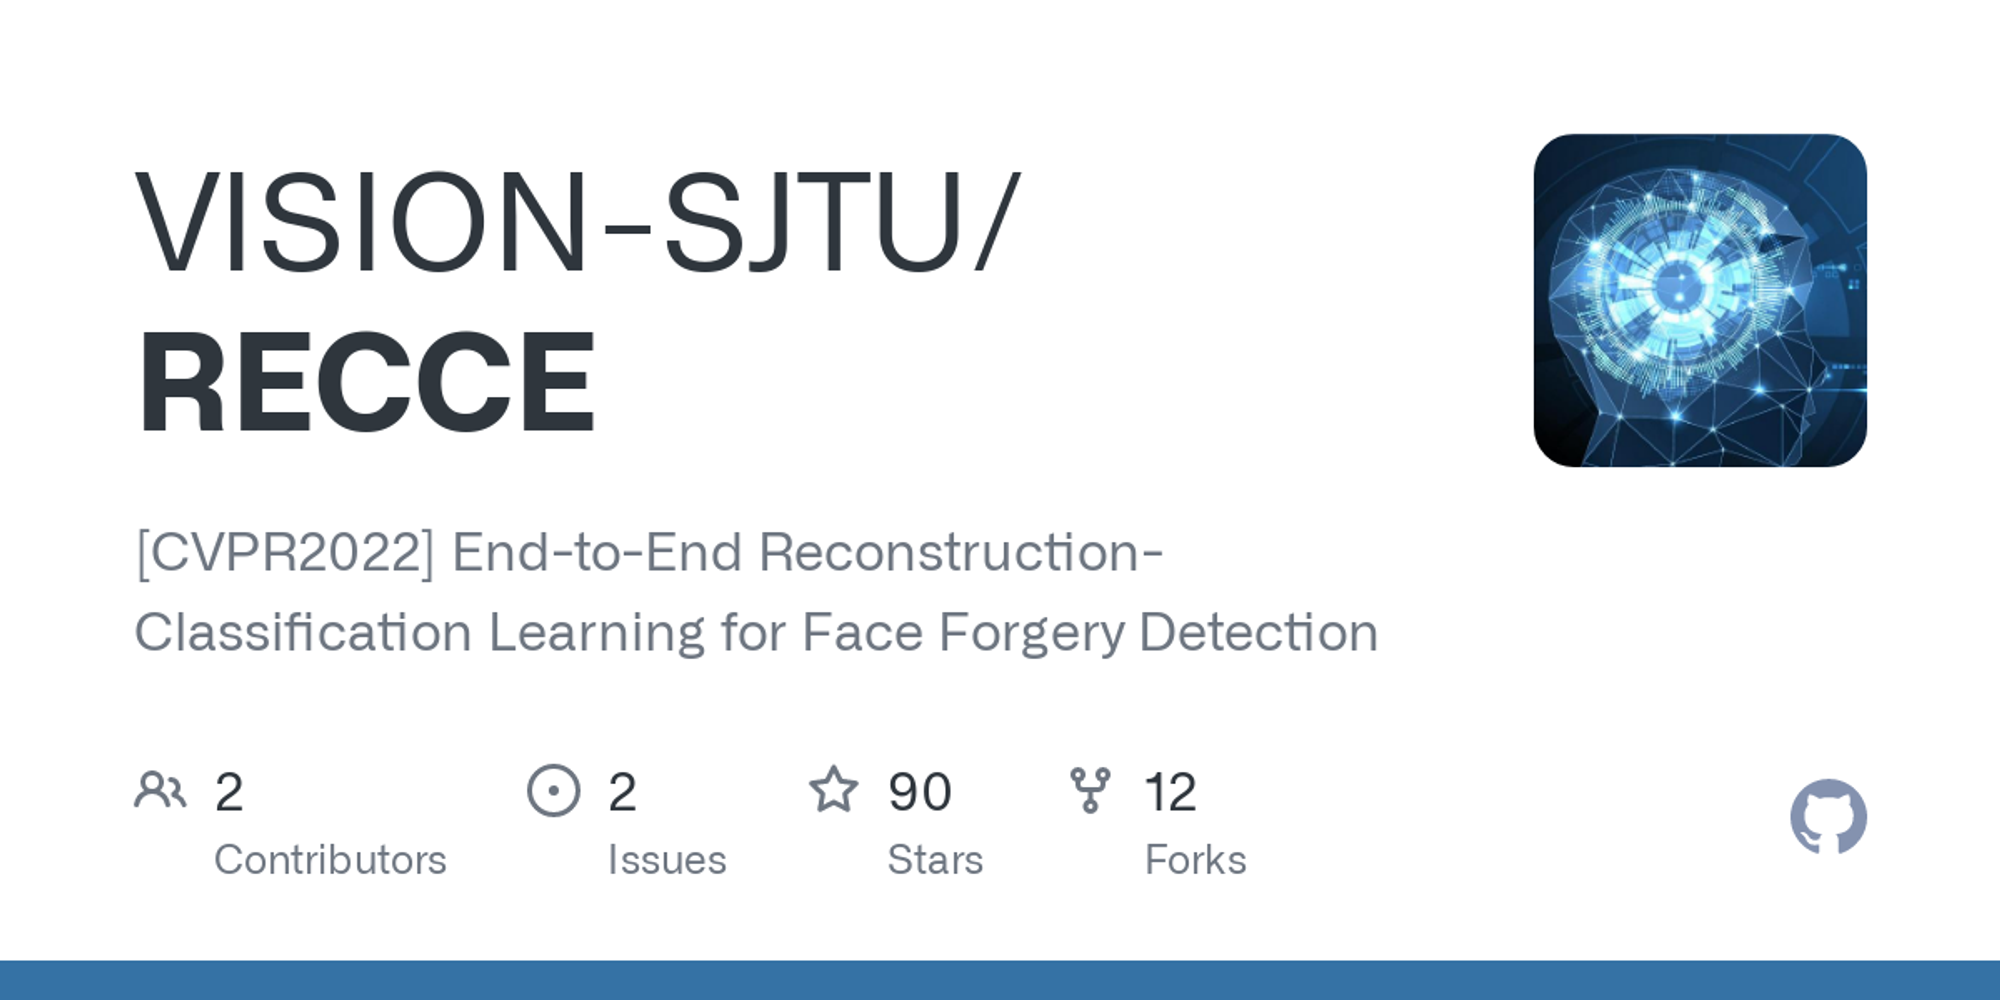 GitHub - VISION-SJTU/RECCE: [CVPR2022] End-to-End Reconstruction-Classification Learning for Face Forgery Detection